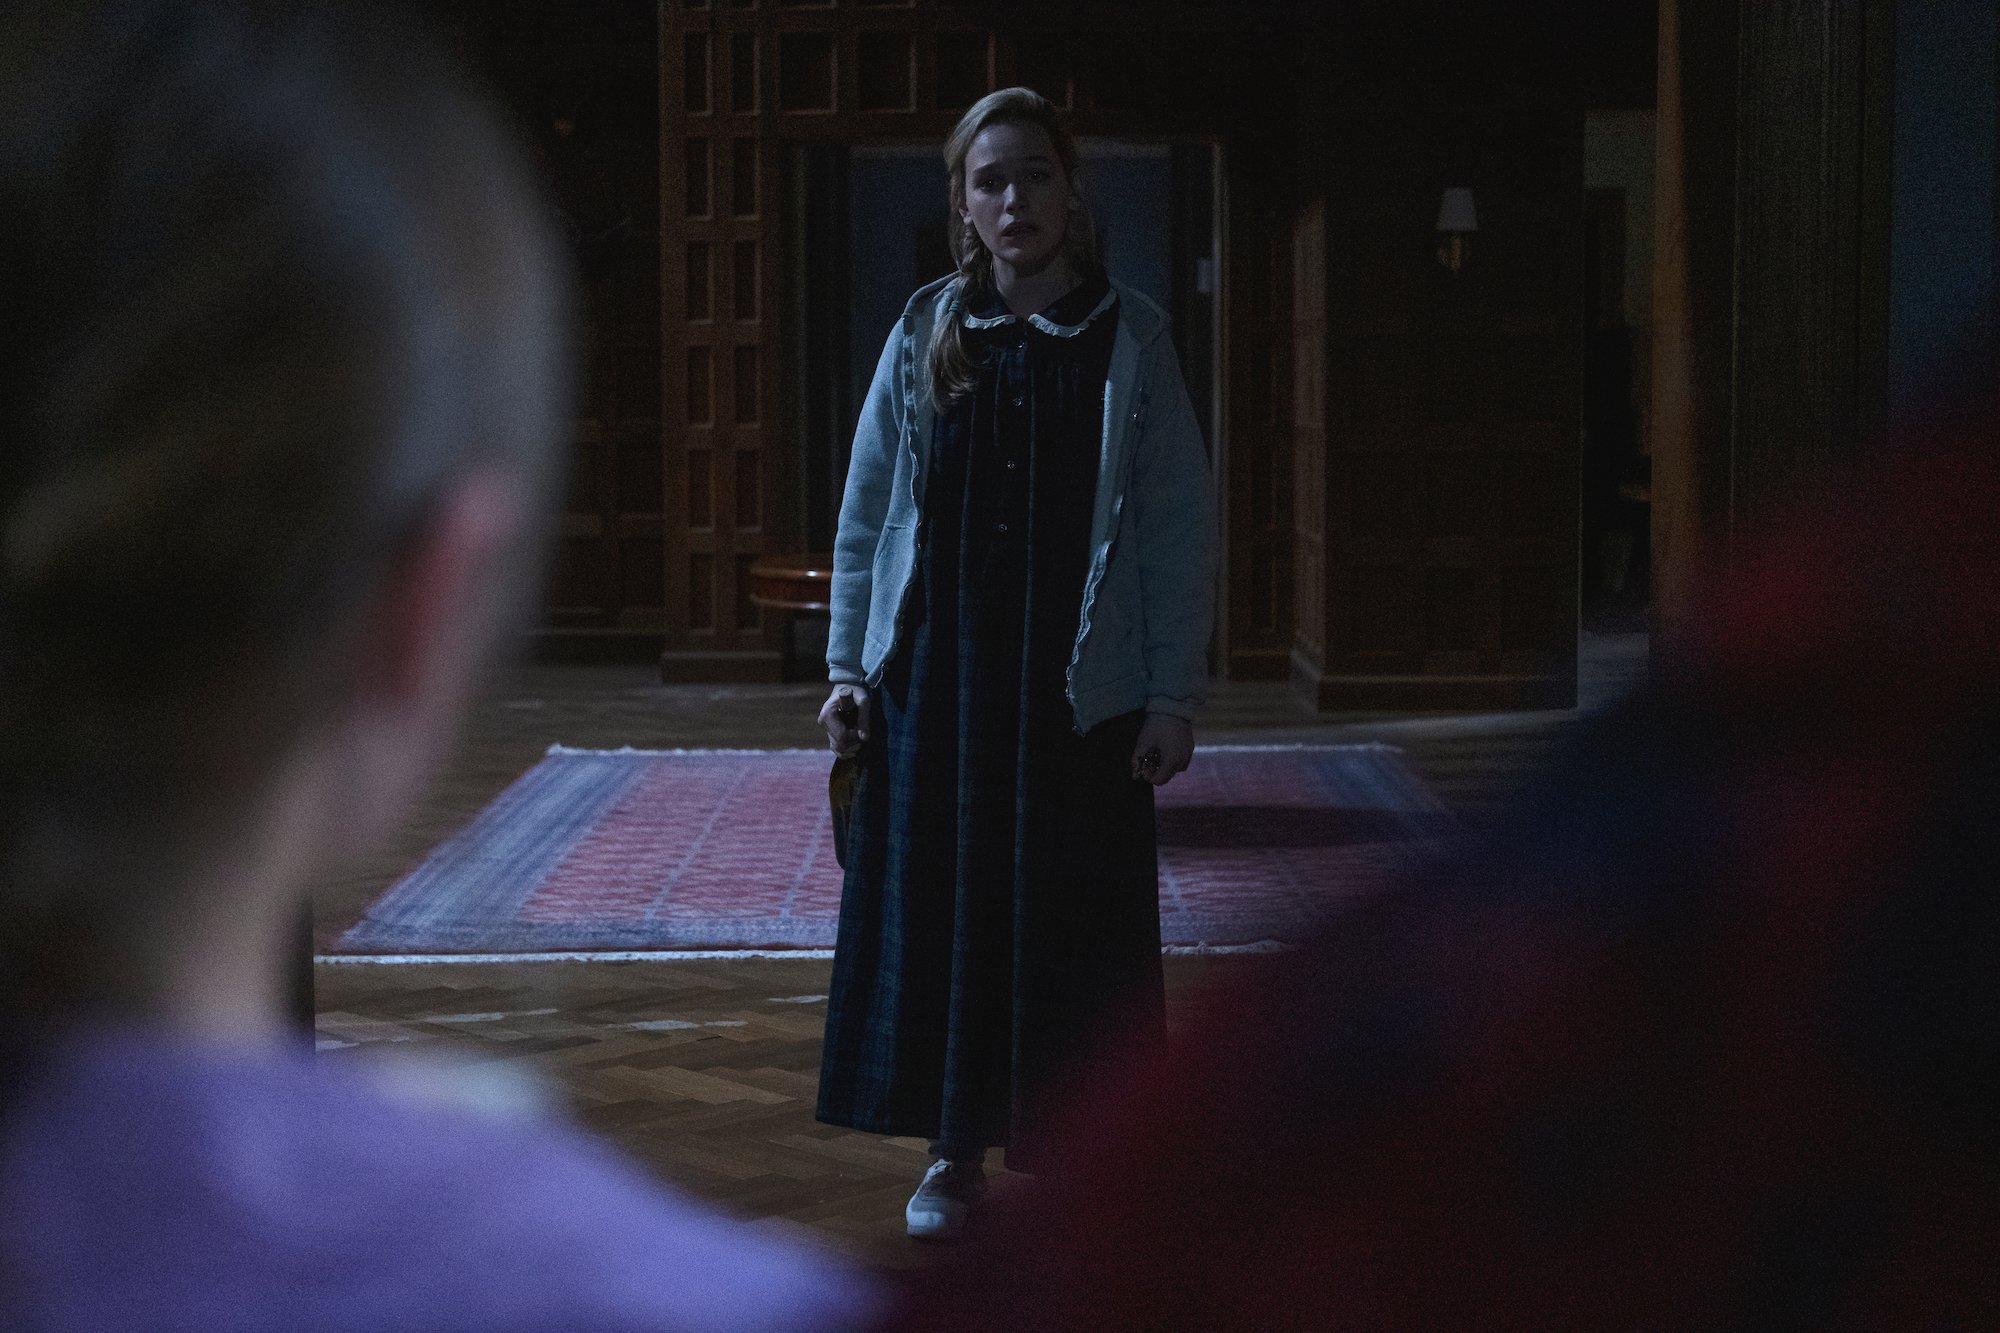 Dani in 'THE HAUNTING OF BLY MANOR'